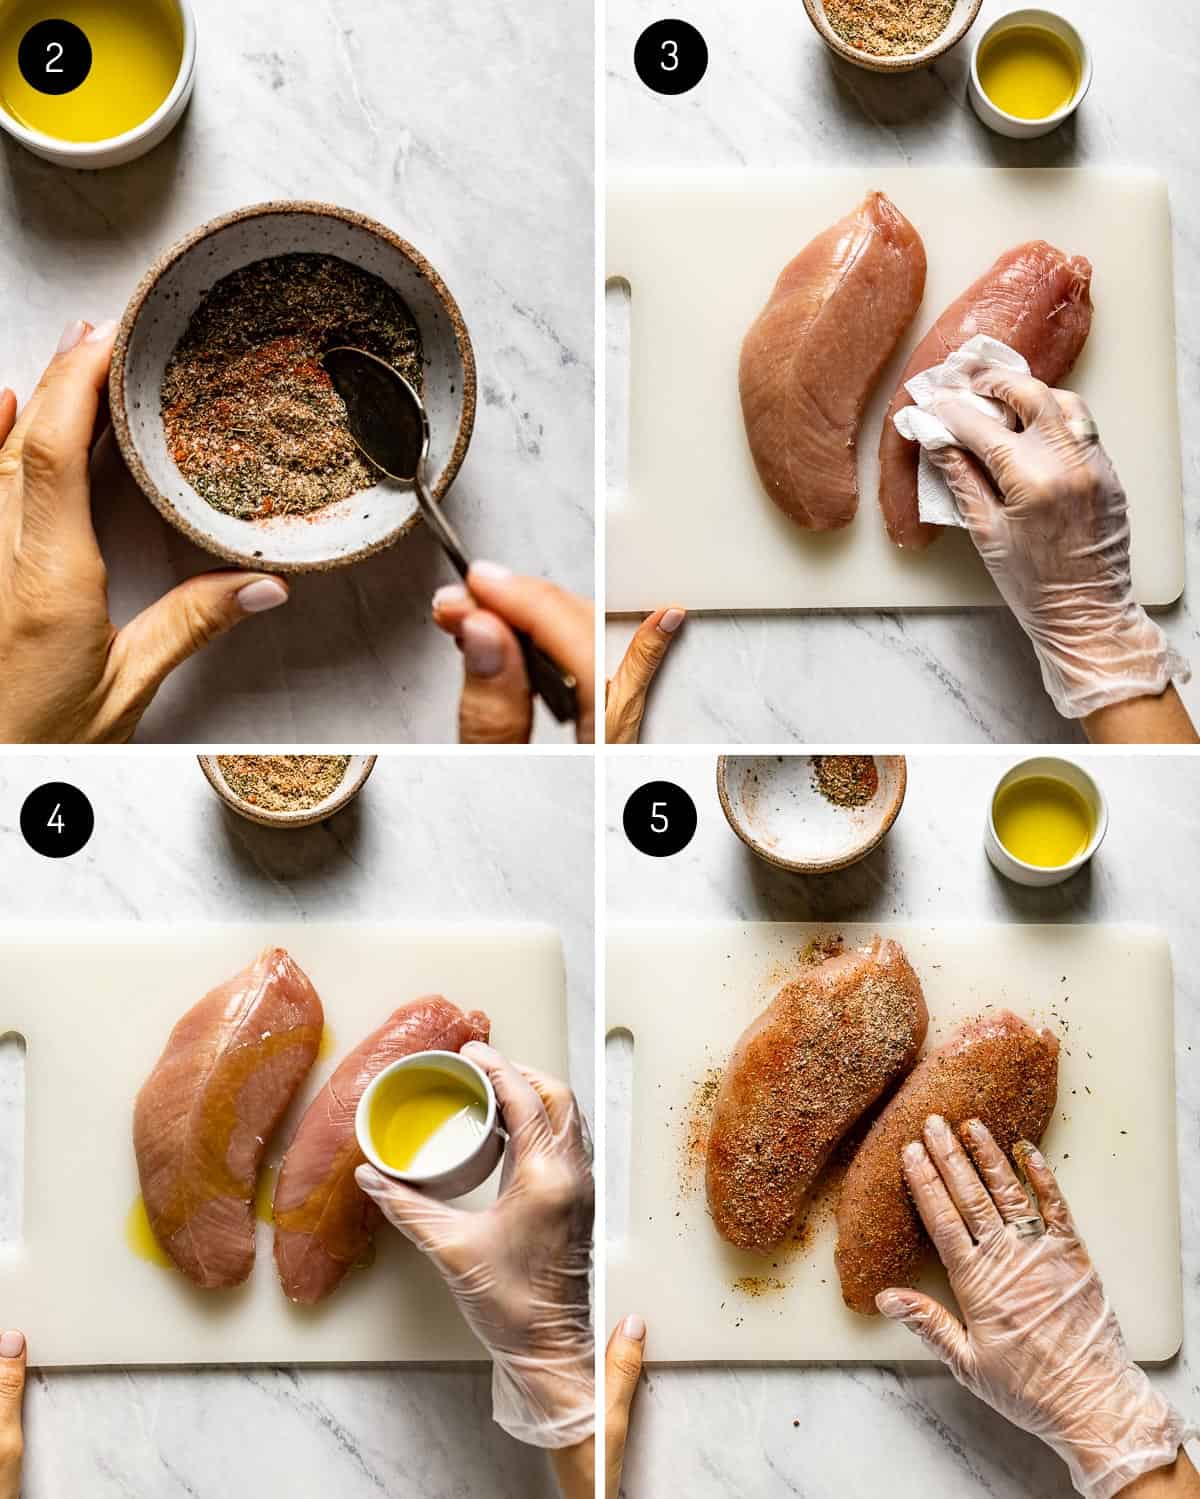 A person showing how to season turkey meat to prepare for baking. 